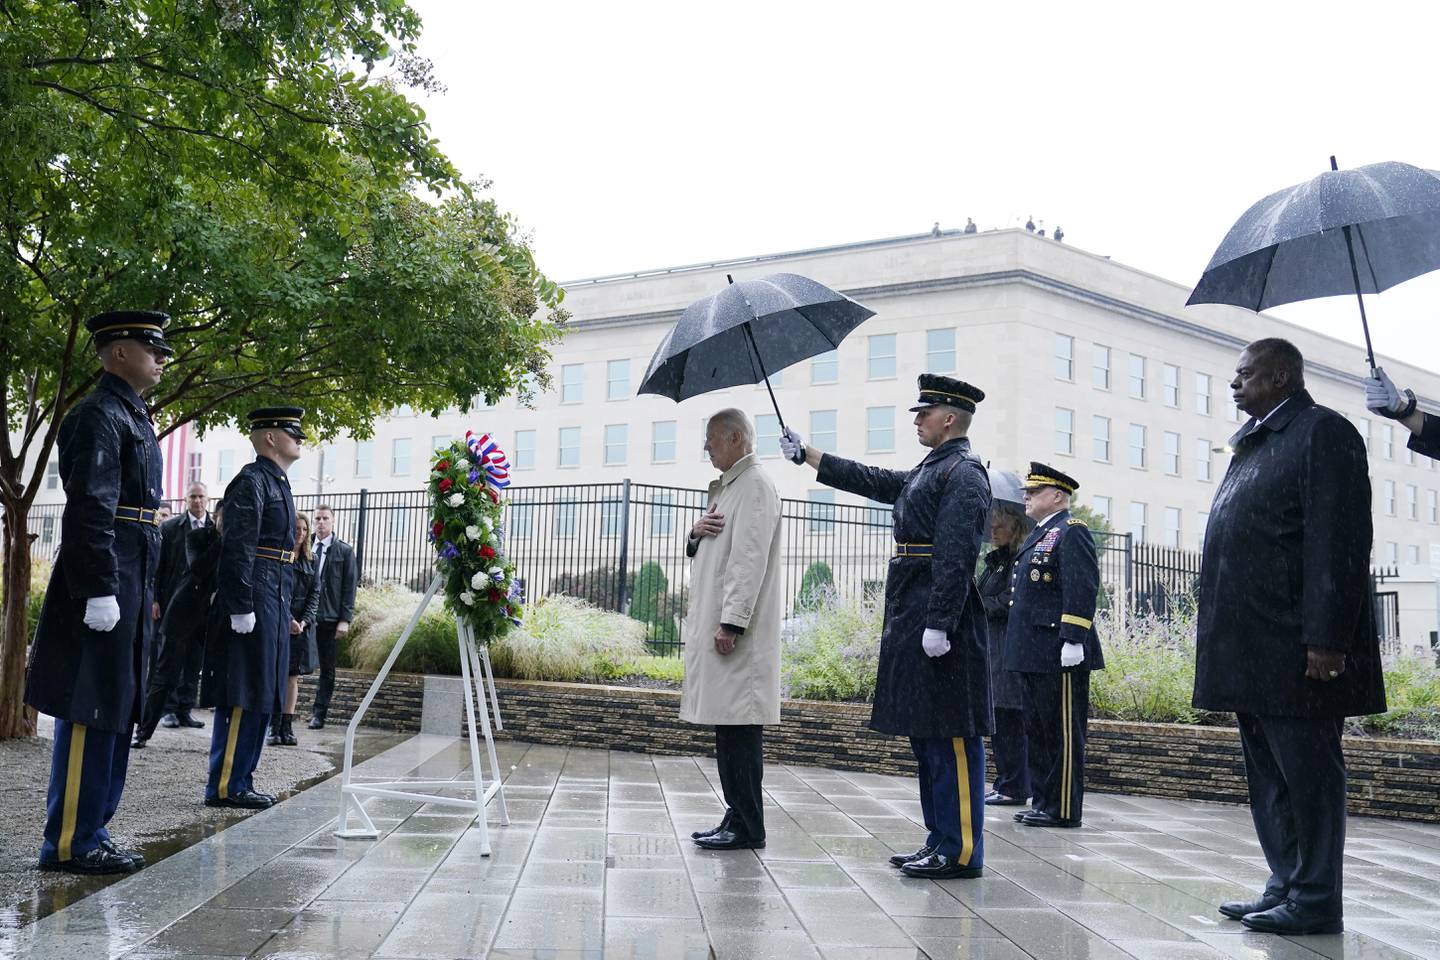 President Joe Biden participates in a wreath laying ceremony while visiting the Pentagon in Washington, Sunday, Sept. 11, 2022, to honor and remember the victims of the September 11th terror attack. Standing with the President are Defense Secretary Lloyd Austin and Chairman of the Joint Chiefs, Gen. Mark Milley.